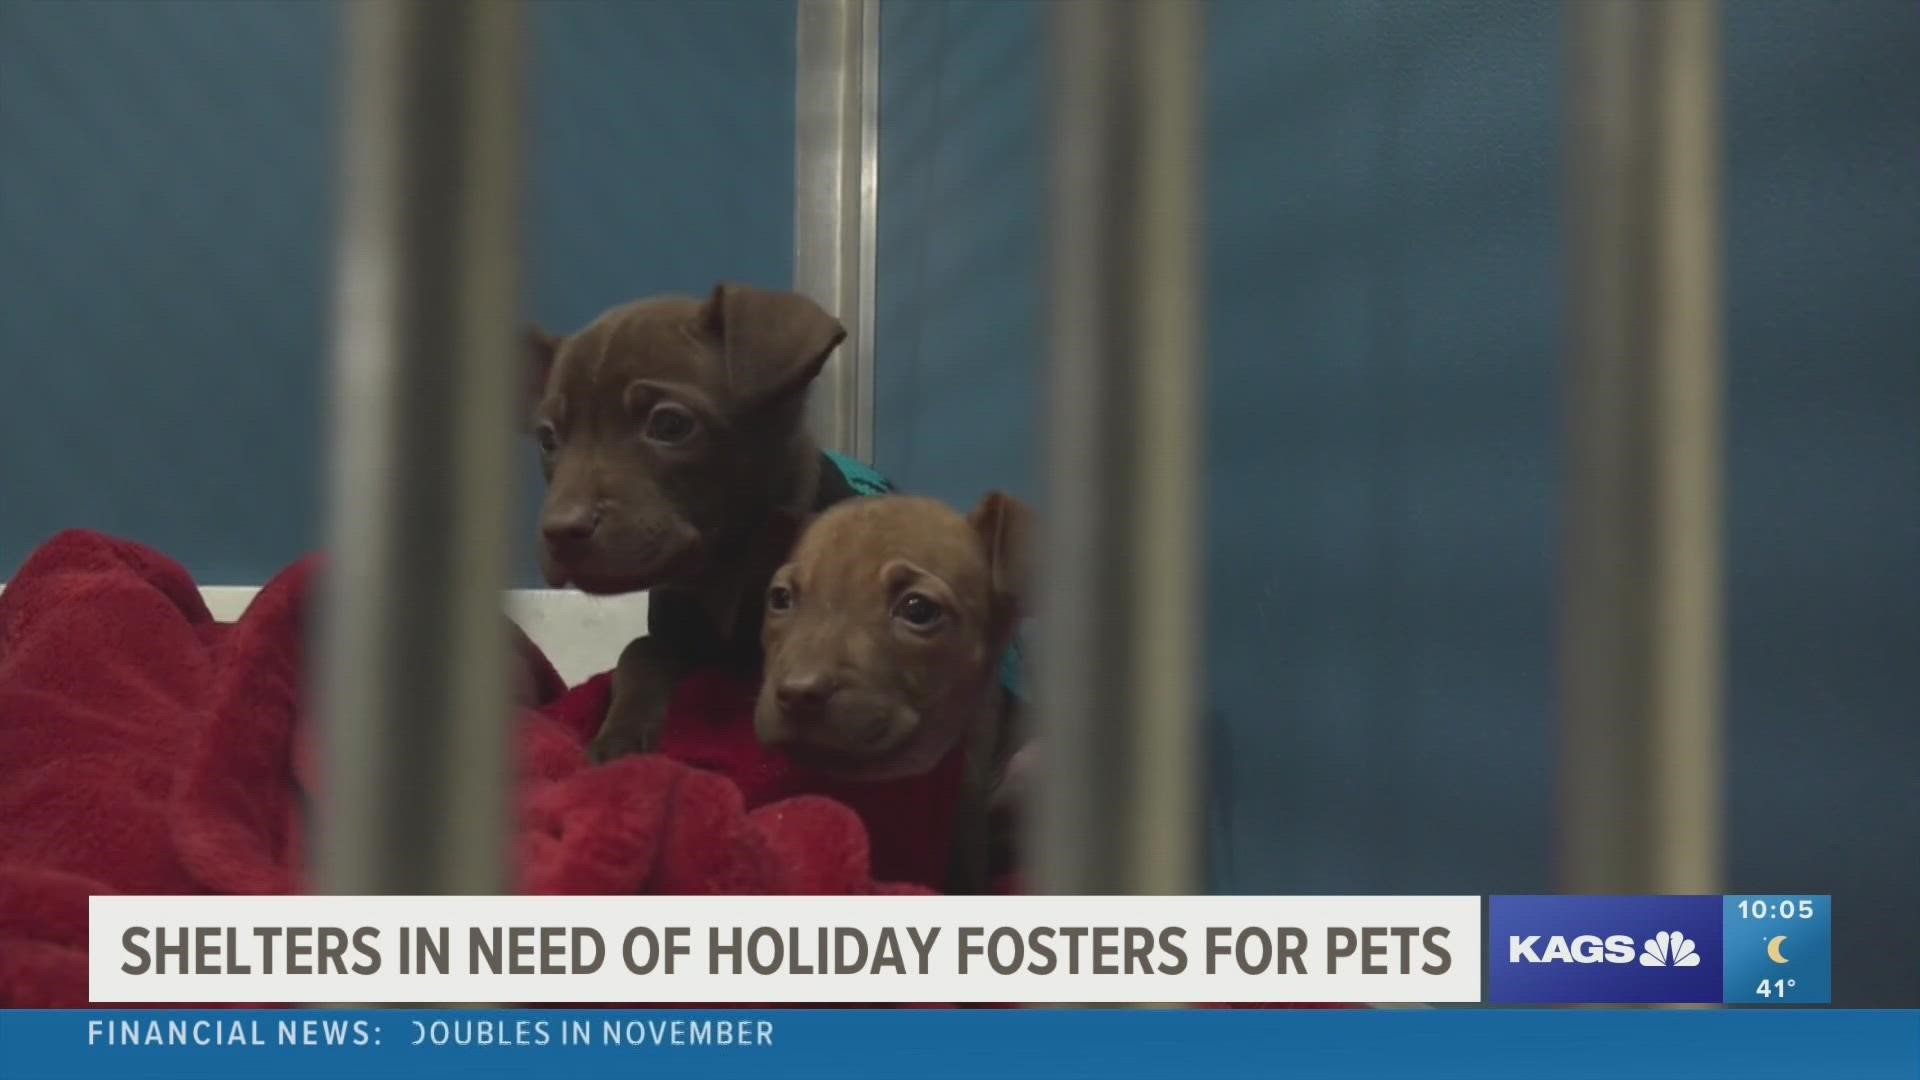 The Aggieland Humane Society is seeking foster parents to give shelter pets a temporary home for the holiday season.